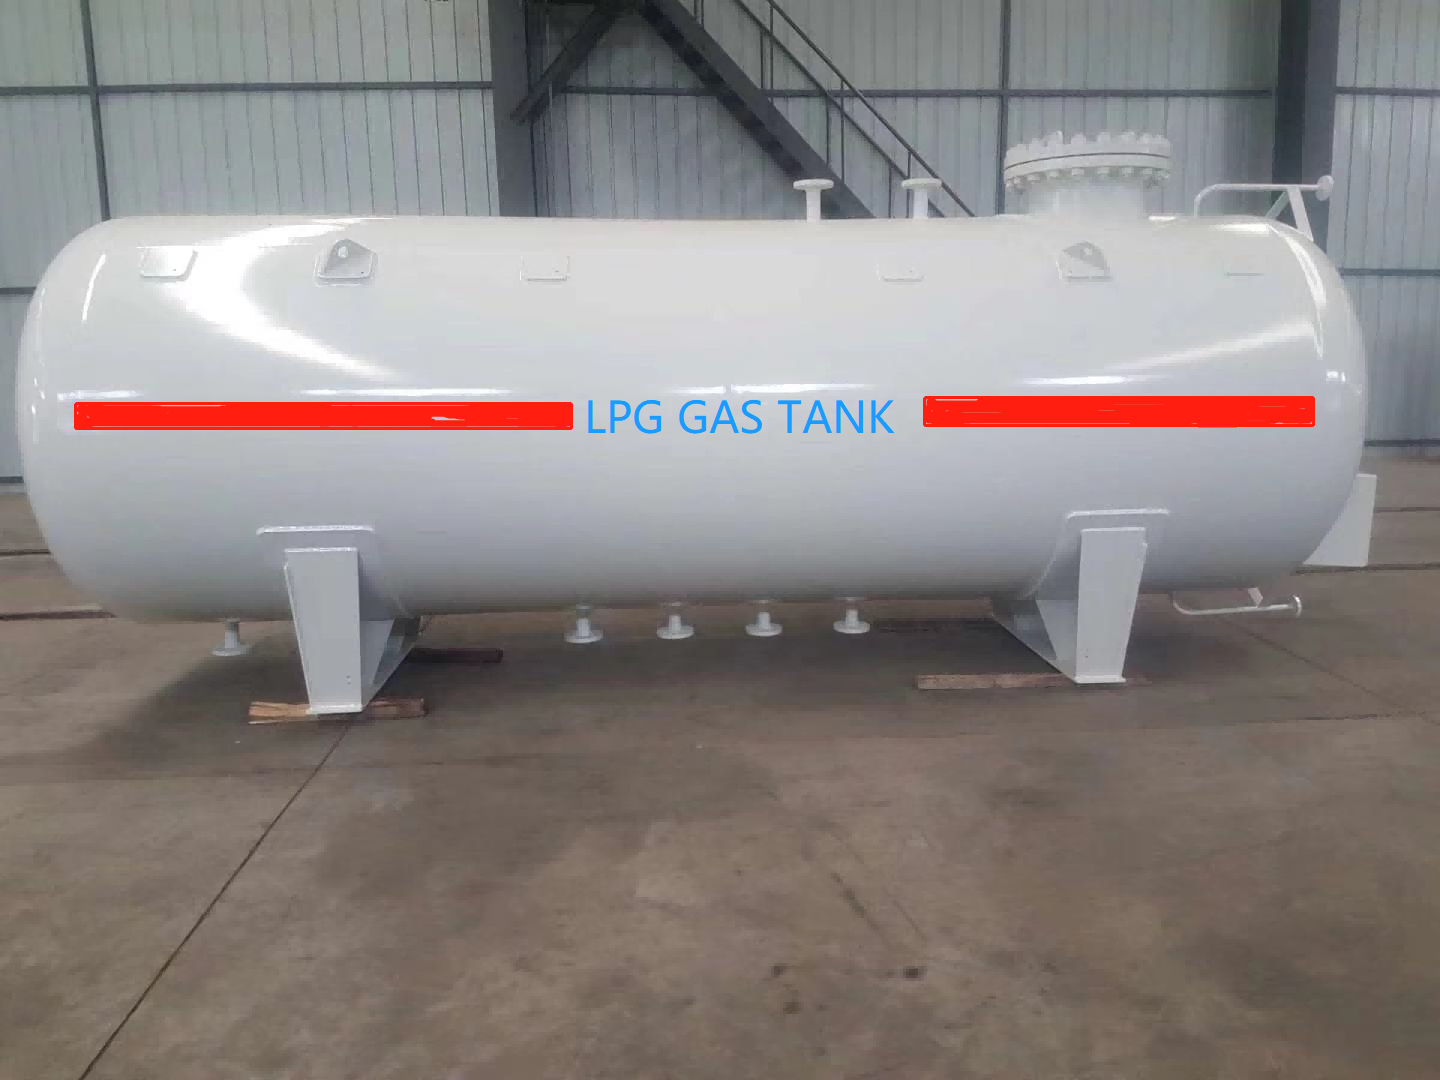 Anti-corrosion coating on the surface of liquefied petroleum gas storage tank